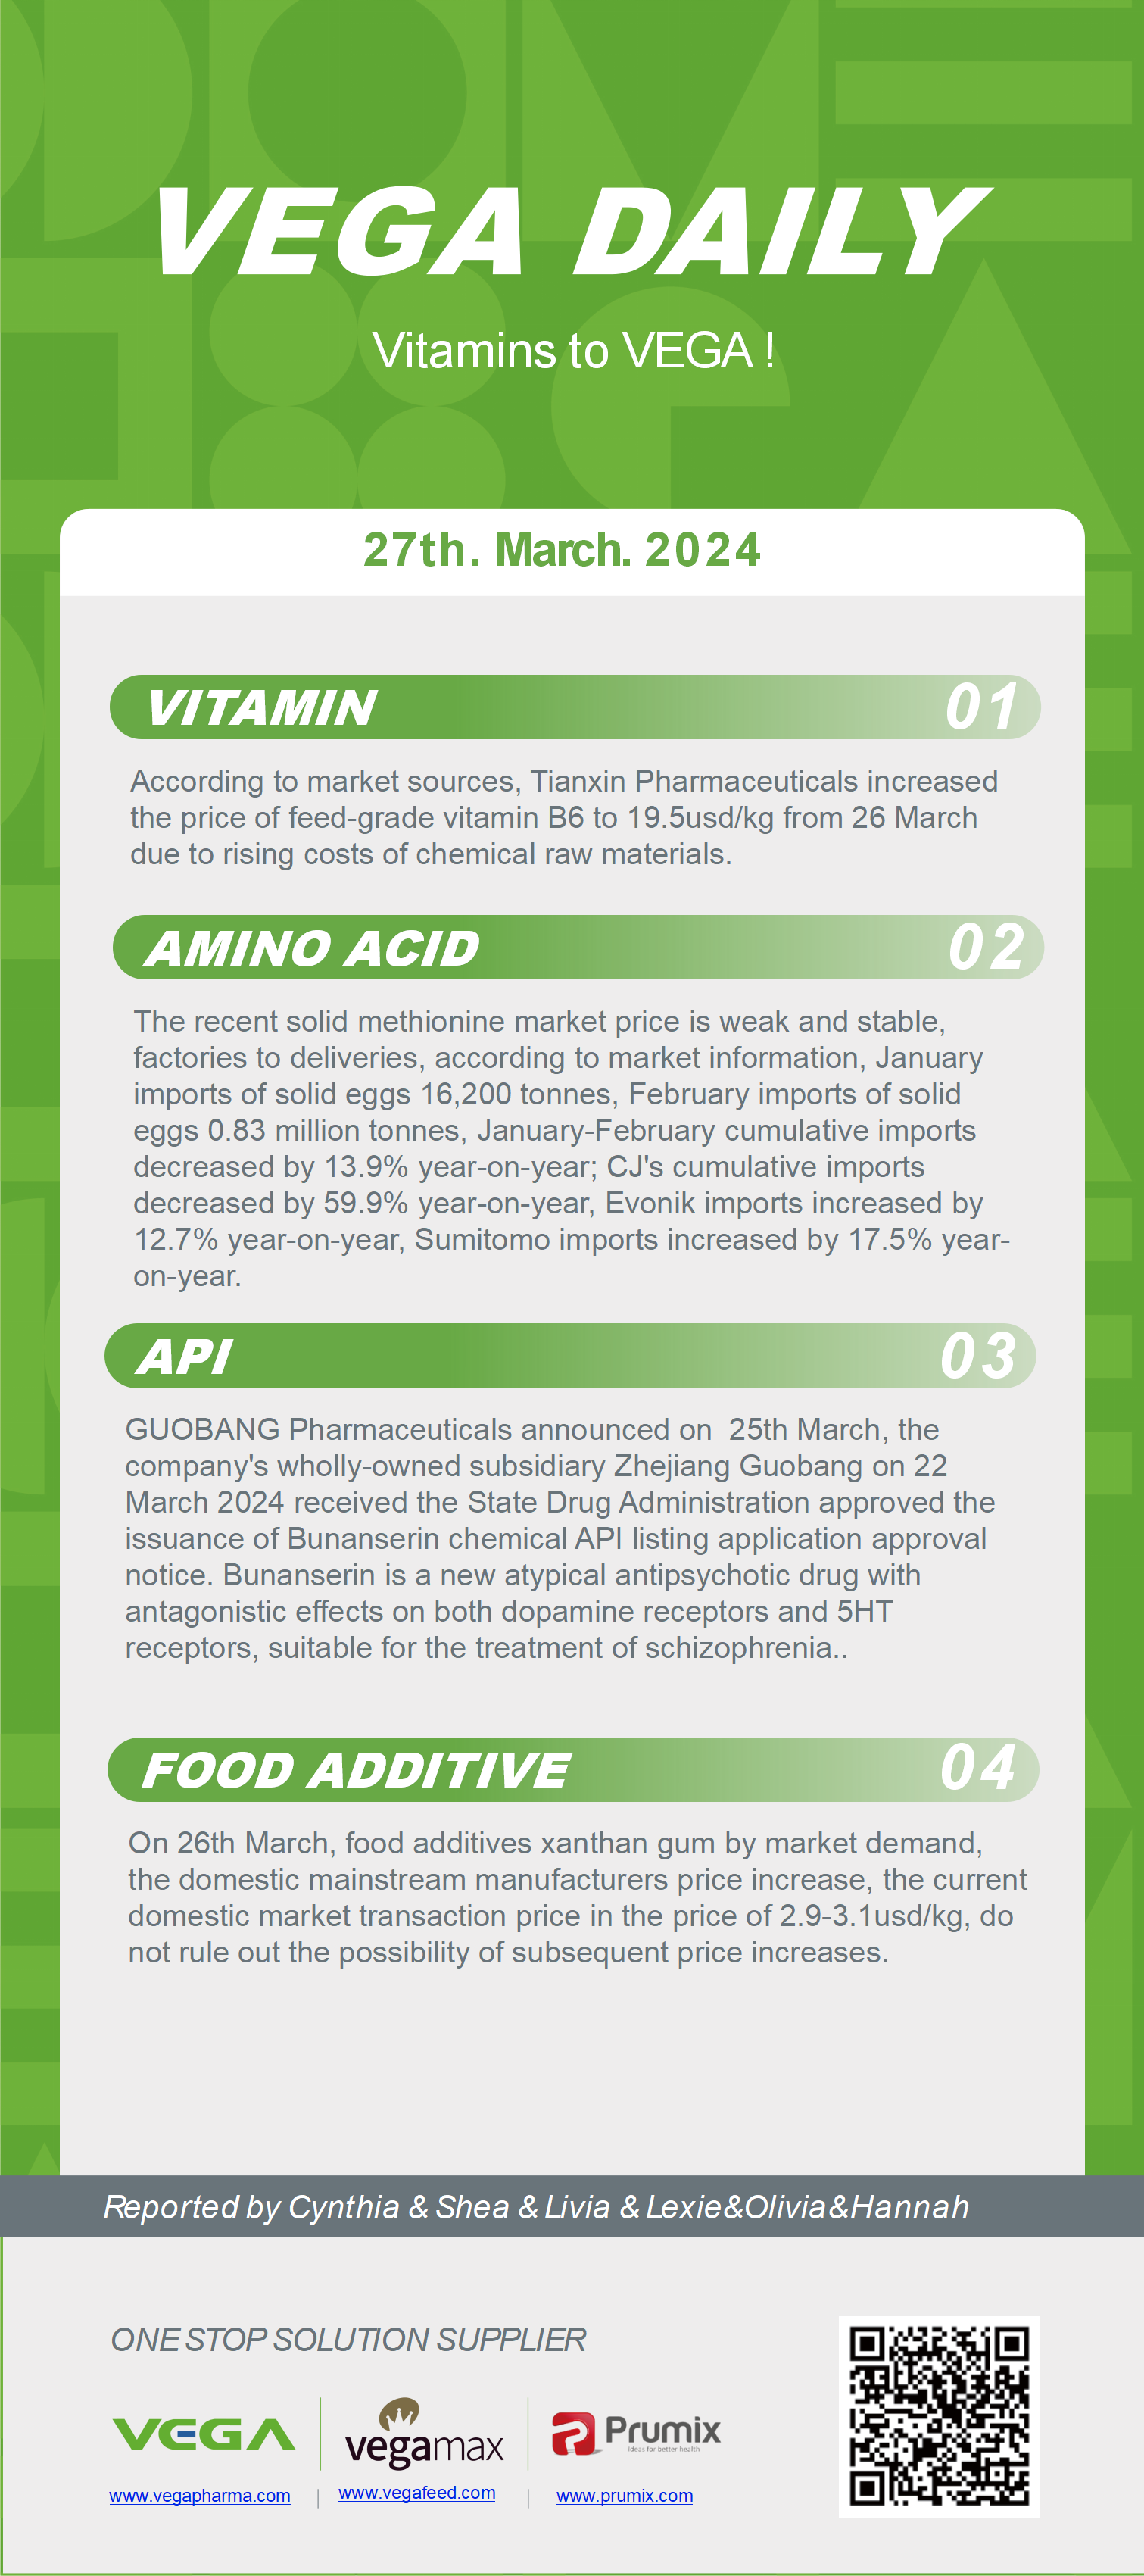 Vega Daily Dated on Mar 27th 2024 Vitamin Amino Acid APl Food Additives.png